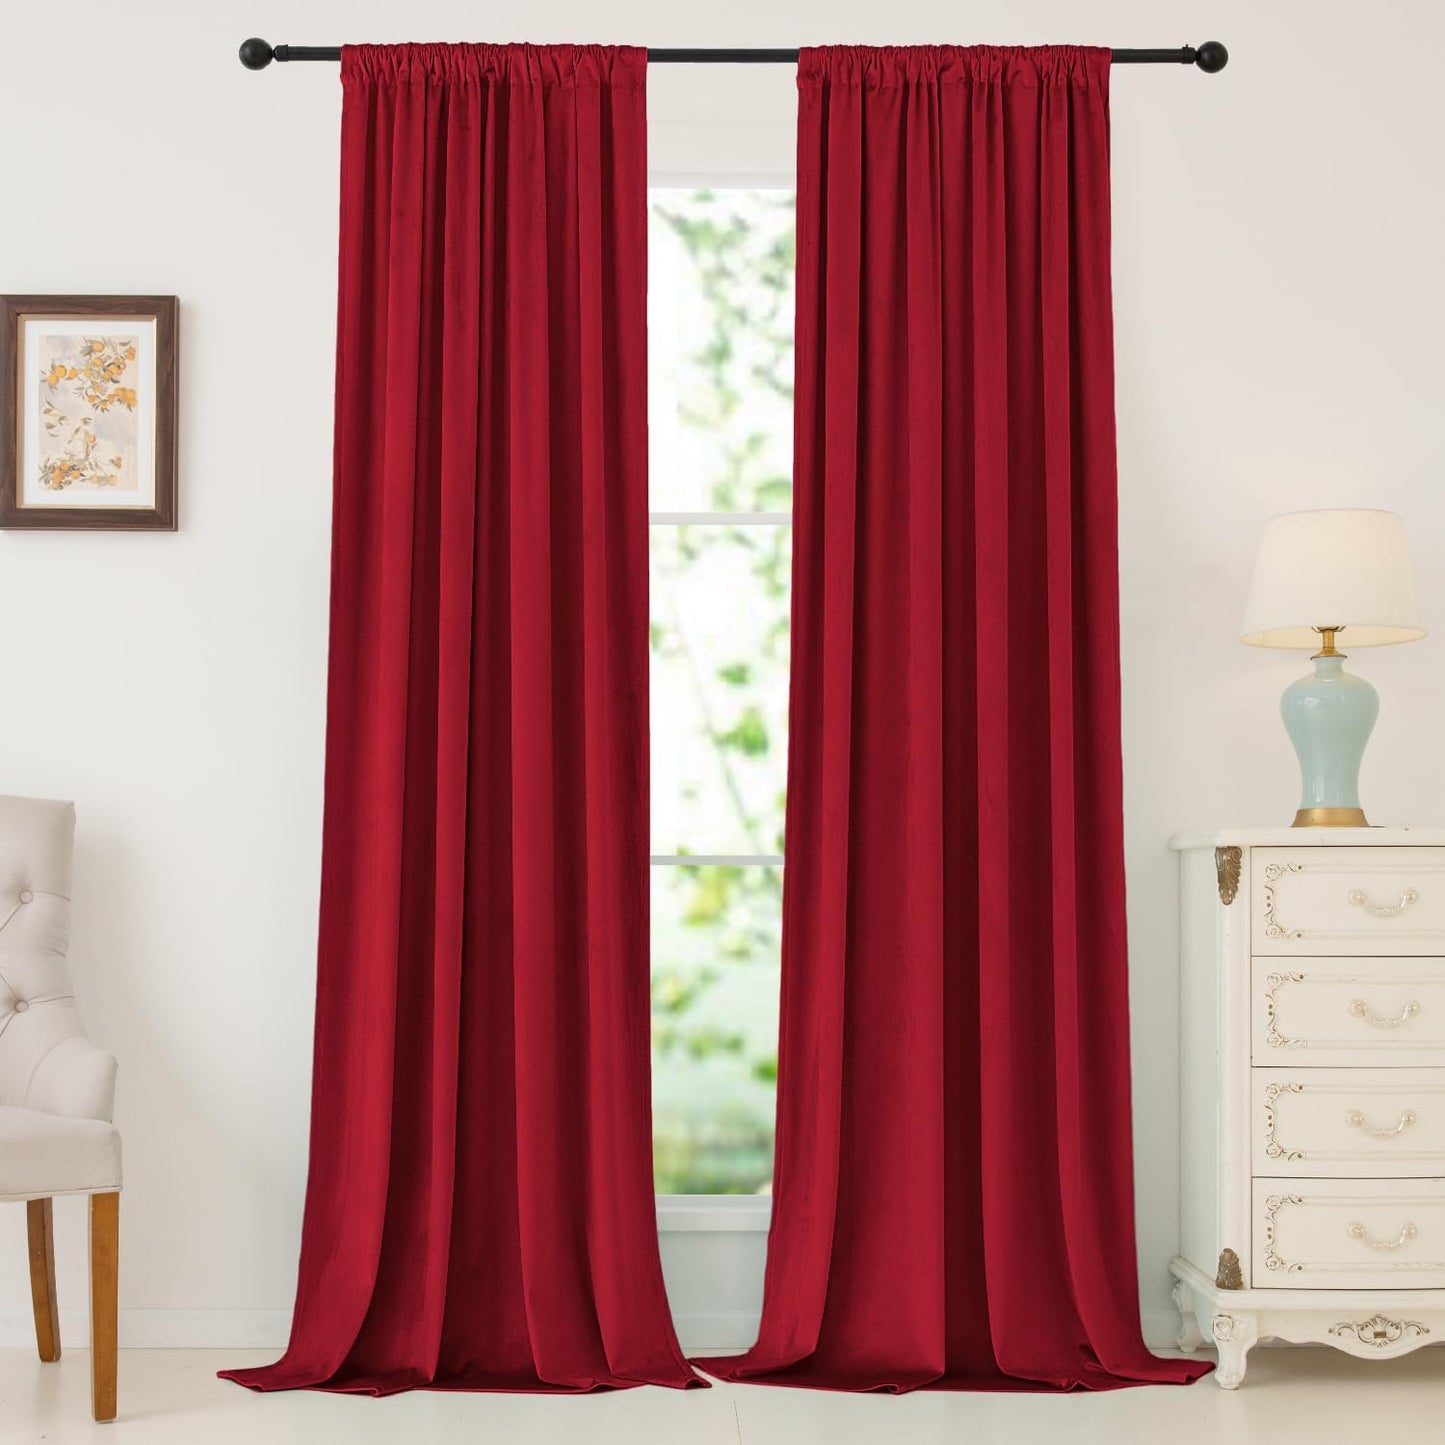 Nanbowang Green Velvet Curtains 63 Inches Long Dark Green Light Blocking Rod Pocket Window Curtain Panels Set of 2 Heat Insulated Curtains Thermal Curtain Panels for Bedroom  nanbowang Red 52"X96" 